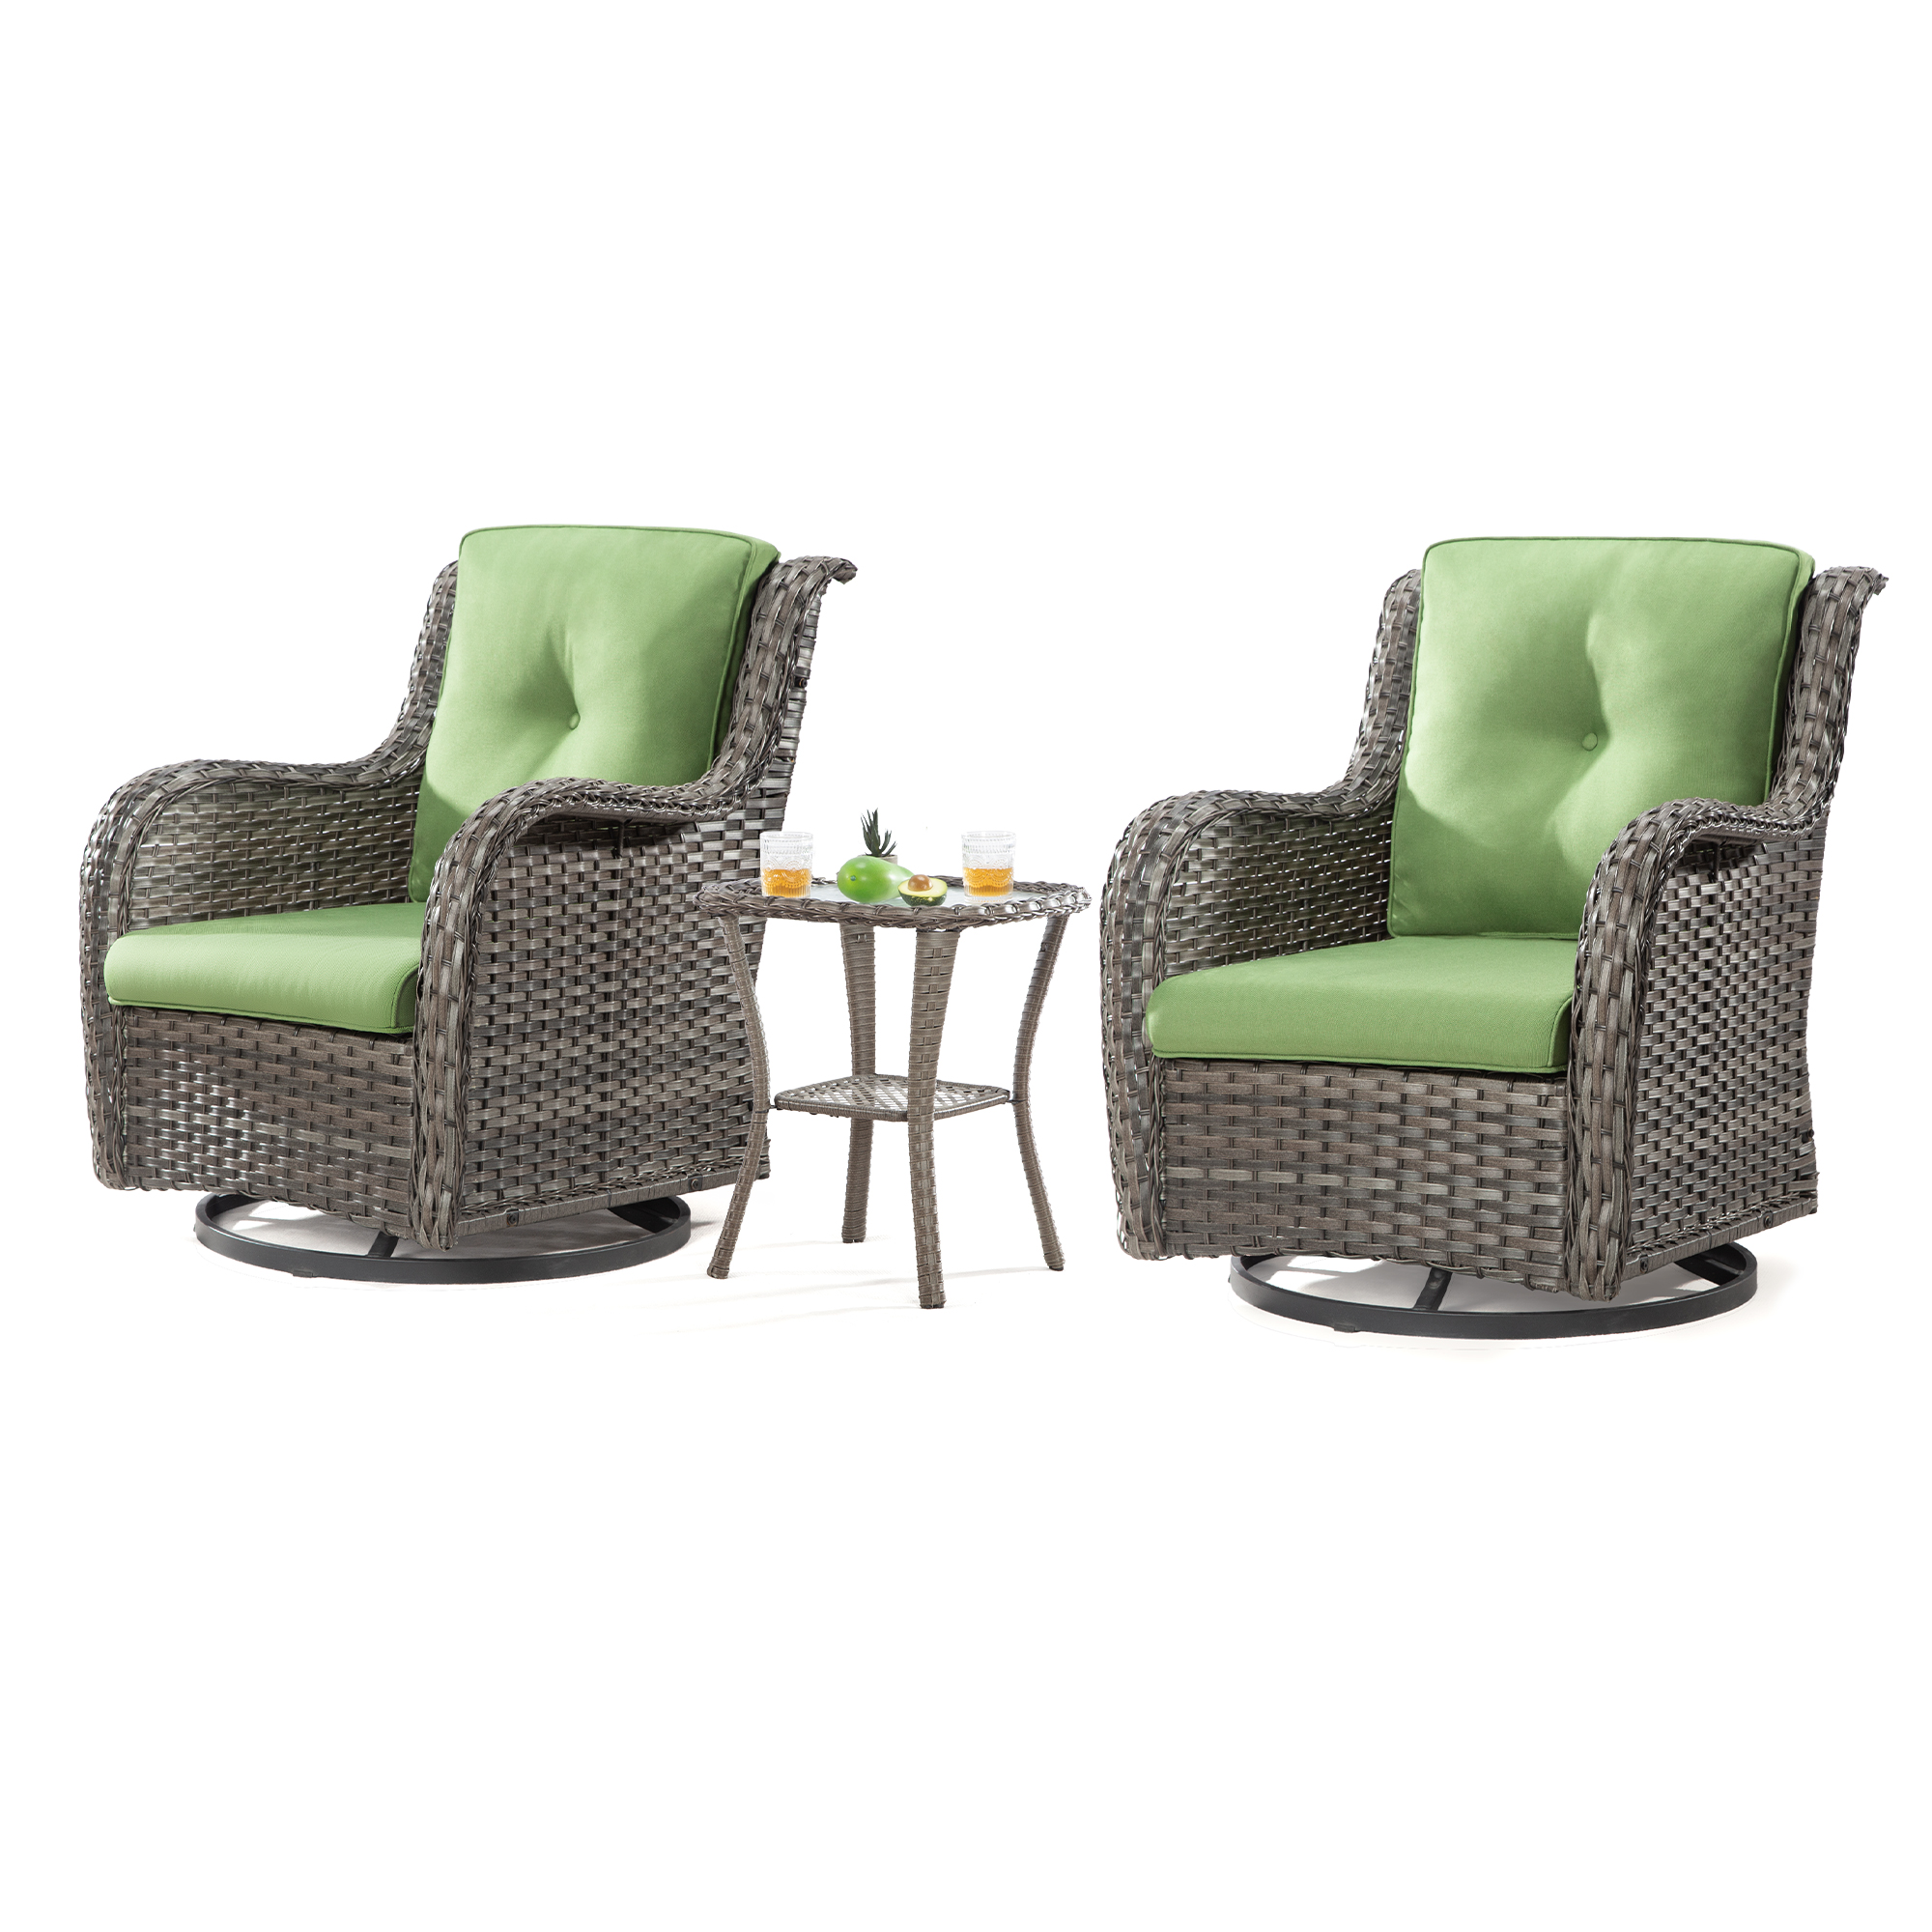 Meetleisure Outdoor Swivel Rocker Wicker Patio Chairs Sets of 2 With Table, Green - image 2 of 6